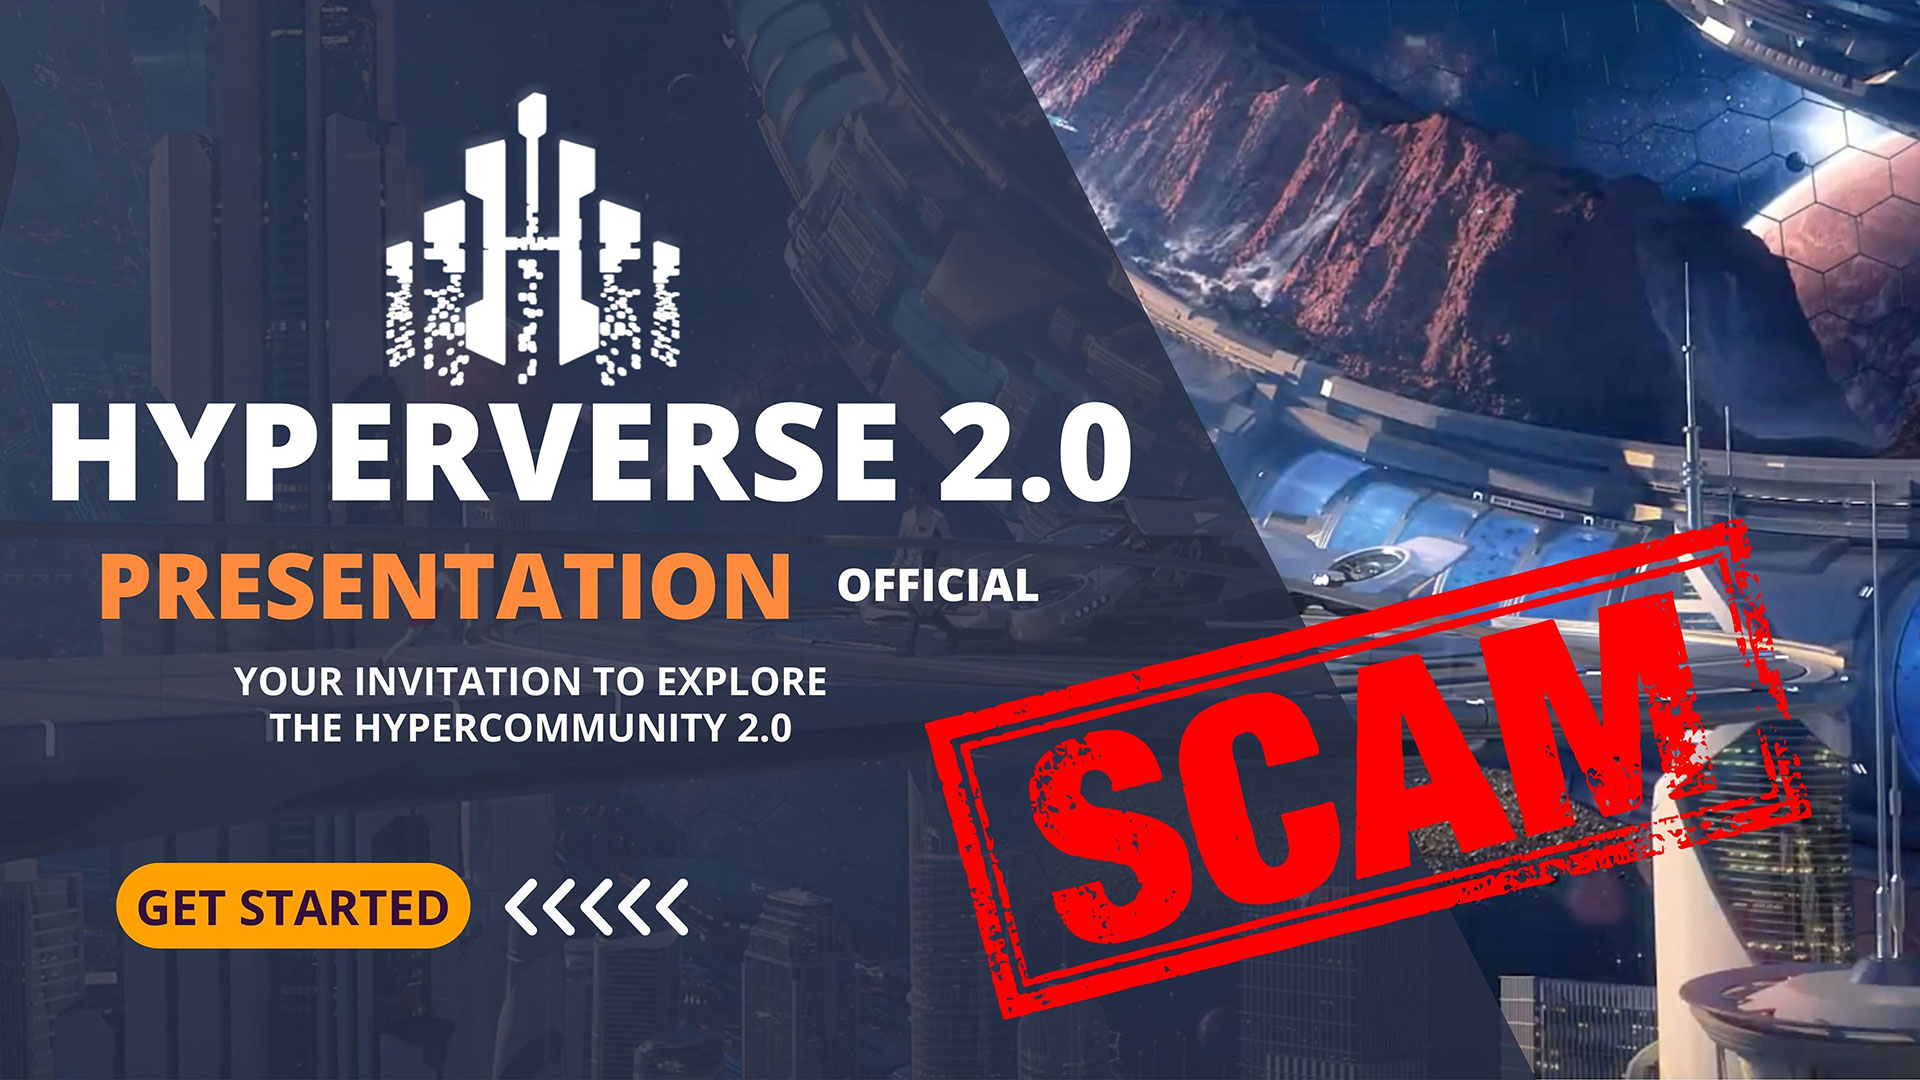 HYPERVERSE 2.0 PRESENTATION OFFICIAL: Your Invitation To Explore The HyperCommunity 2.0 ScamAlert